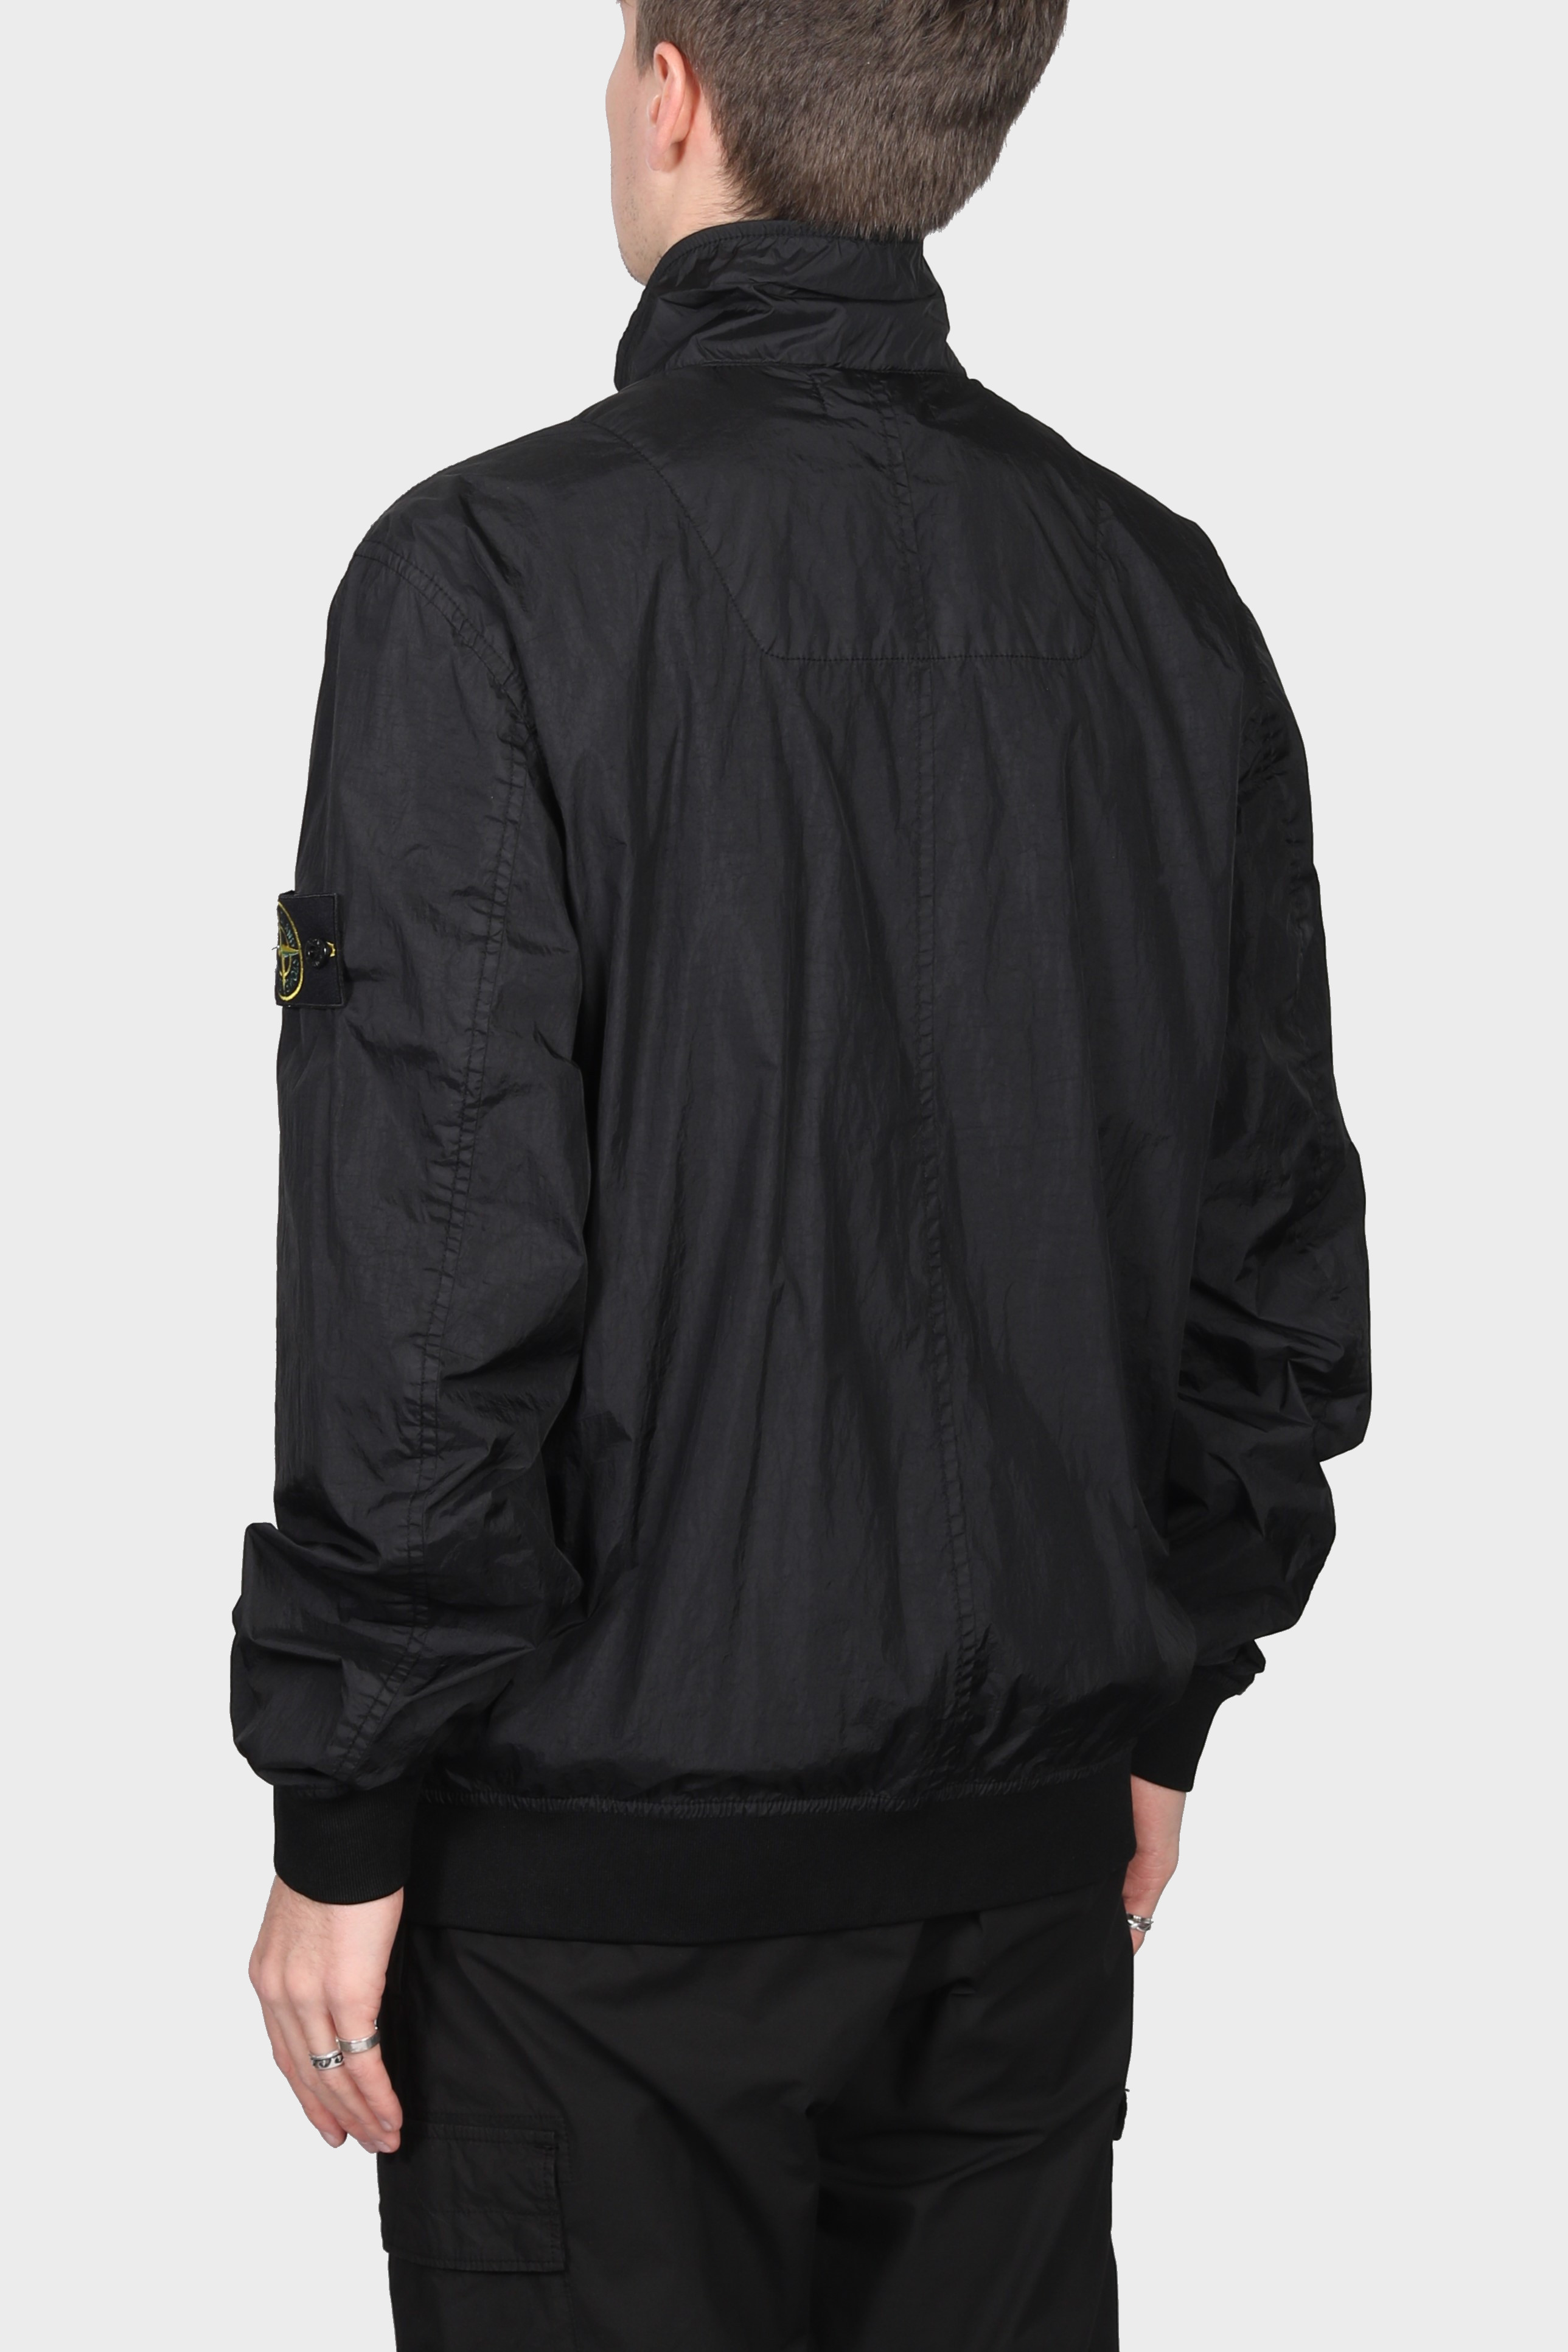 STONE ISLAND Garment Dyed Crinkle Reps Jacket in Black 3XL